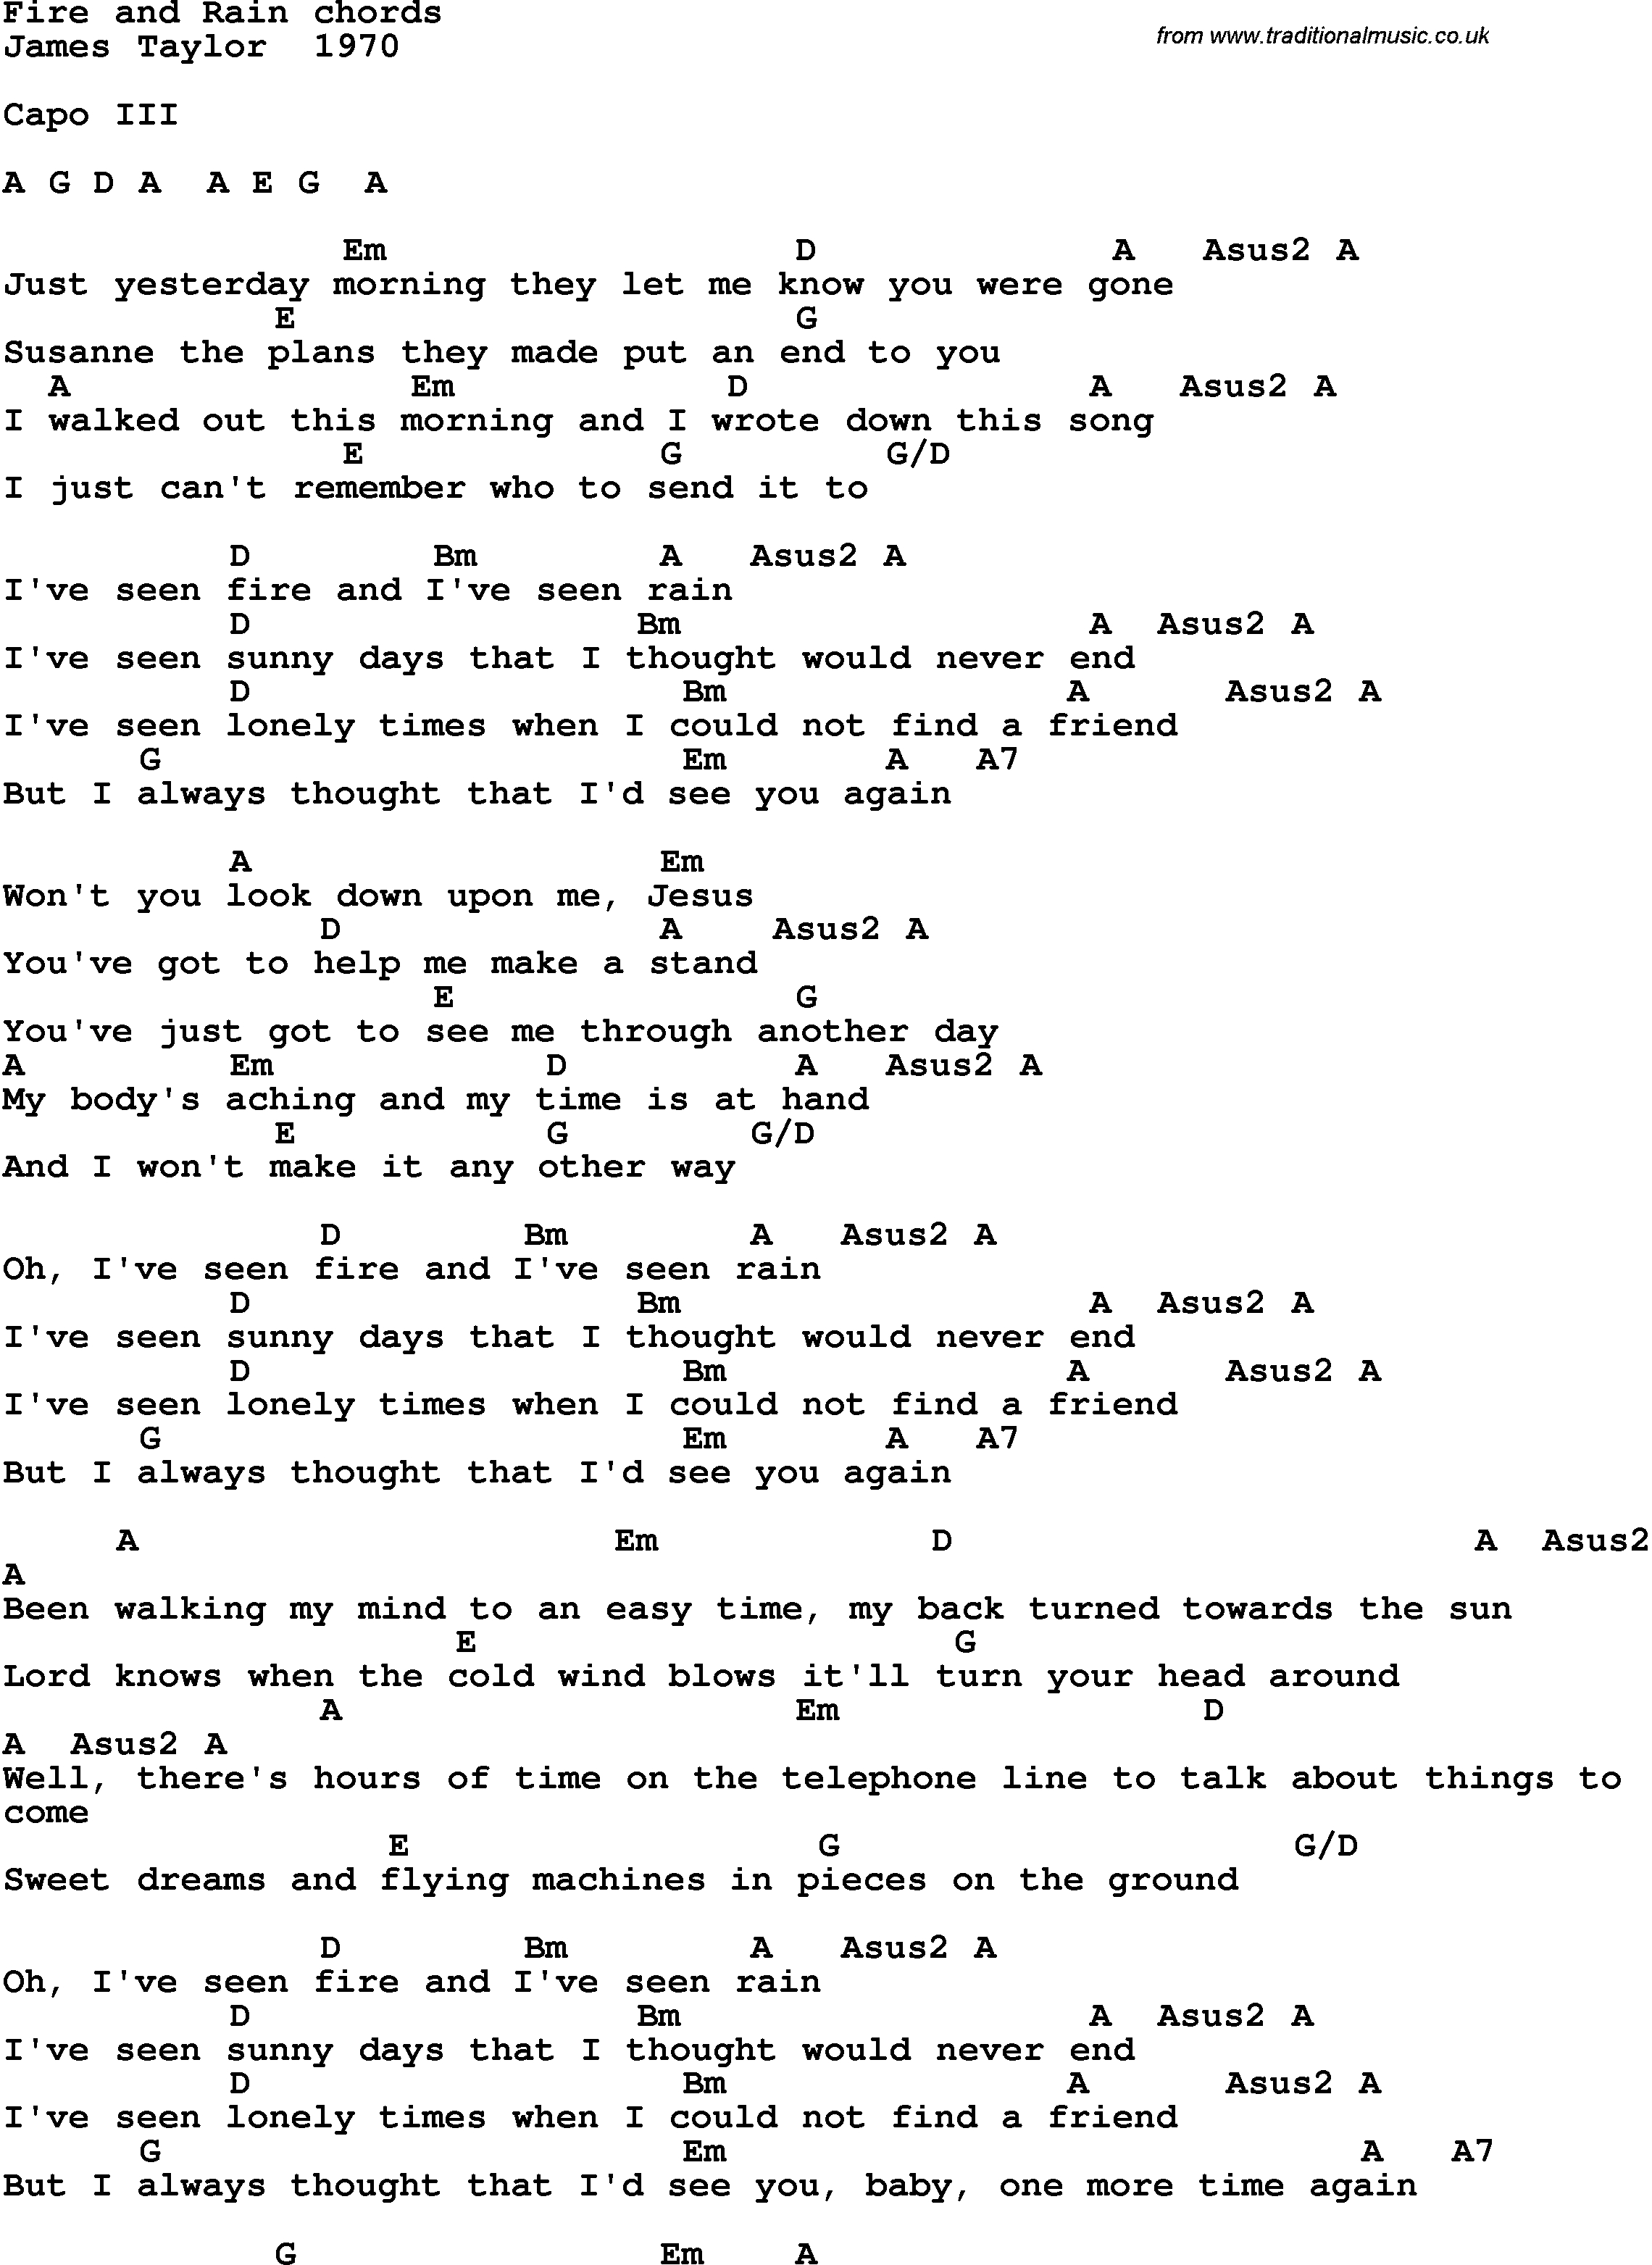 Fire And Rain Chords Song Lyrics With Guitar Chords For Fire And Rain